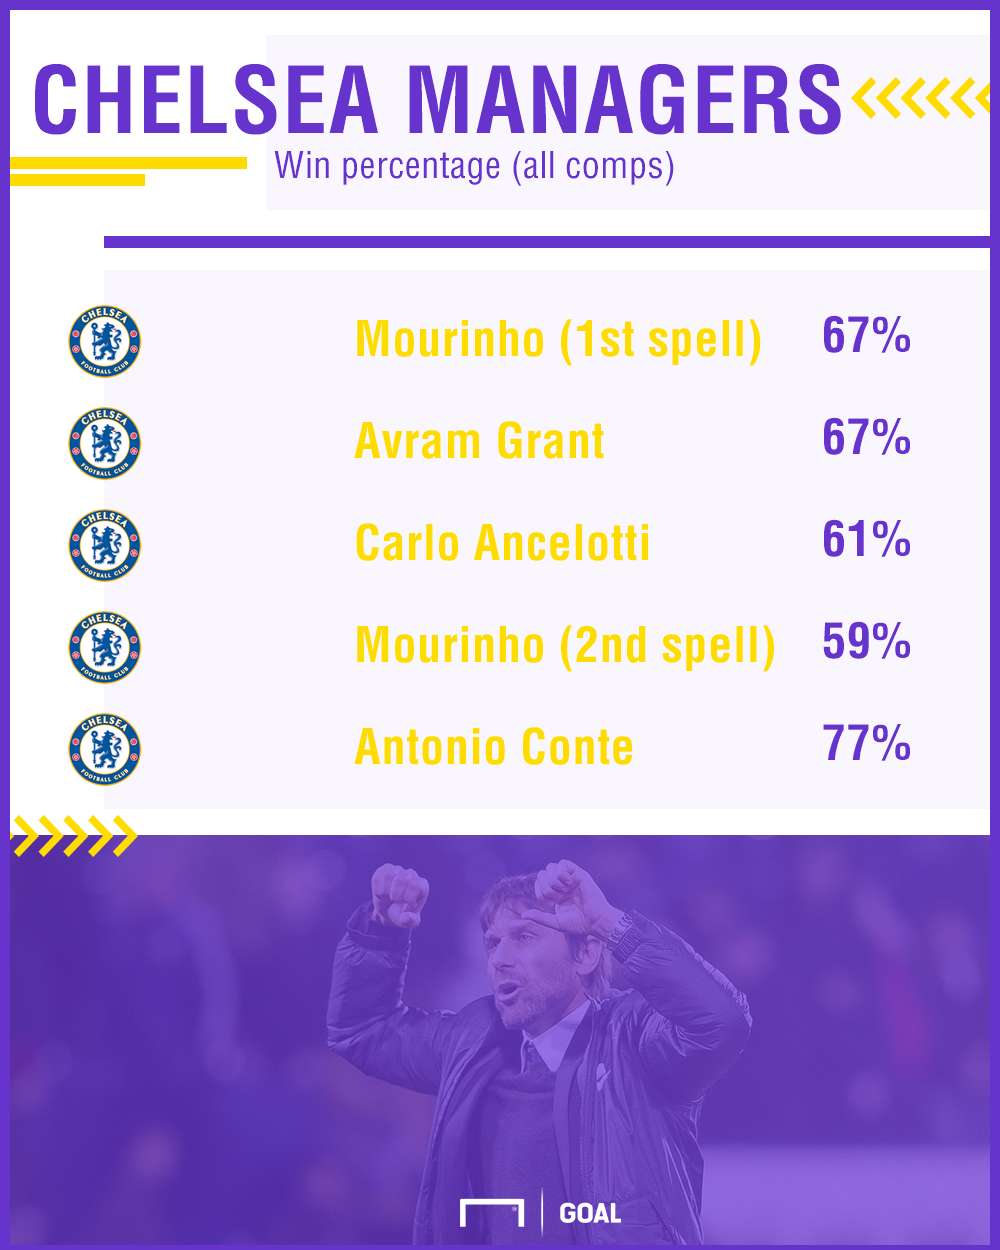 Chelsea managers win percentage